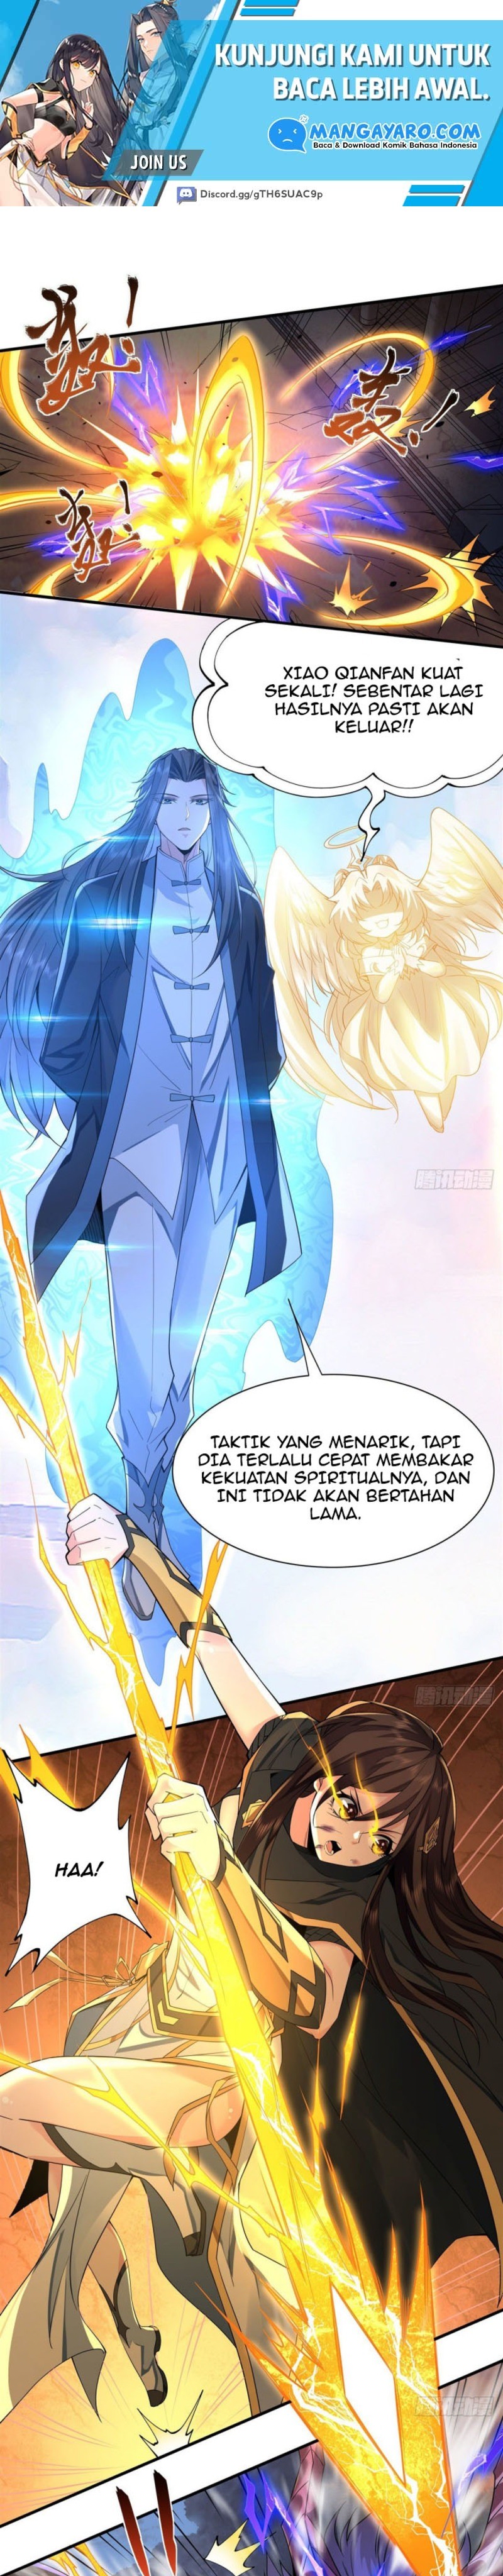 Dilarang COPAS - situs resmi www.mangacanblog.com - Komik my female apprentices are all big shots from the future 011 - chapter 11 12 Indonesia my female apprentices are all big shots from the future 011 - chapter 11 Terbaru 19|Baca Manga Komik Indonesia|Mangacan